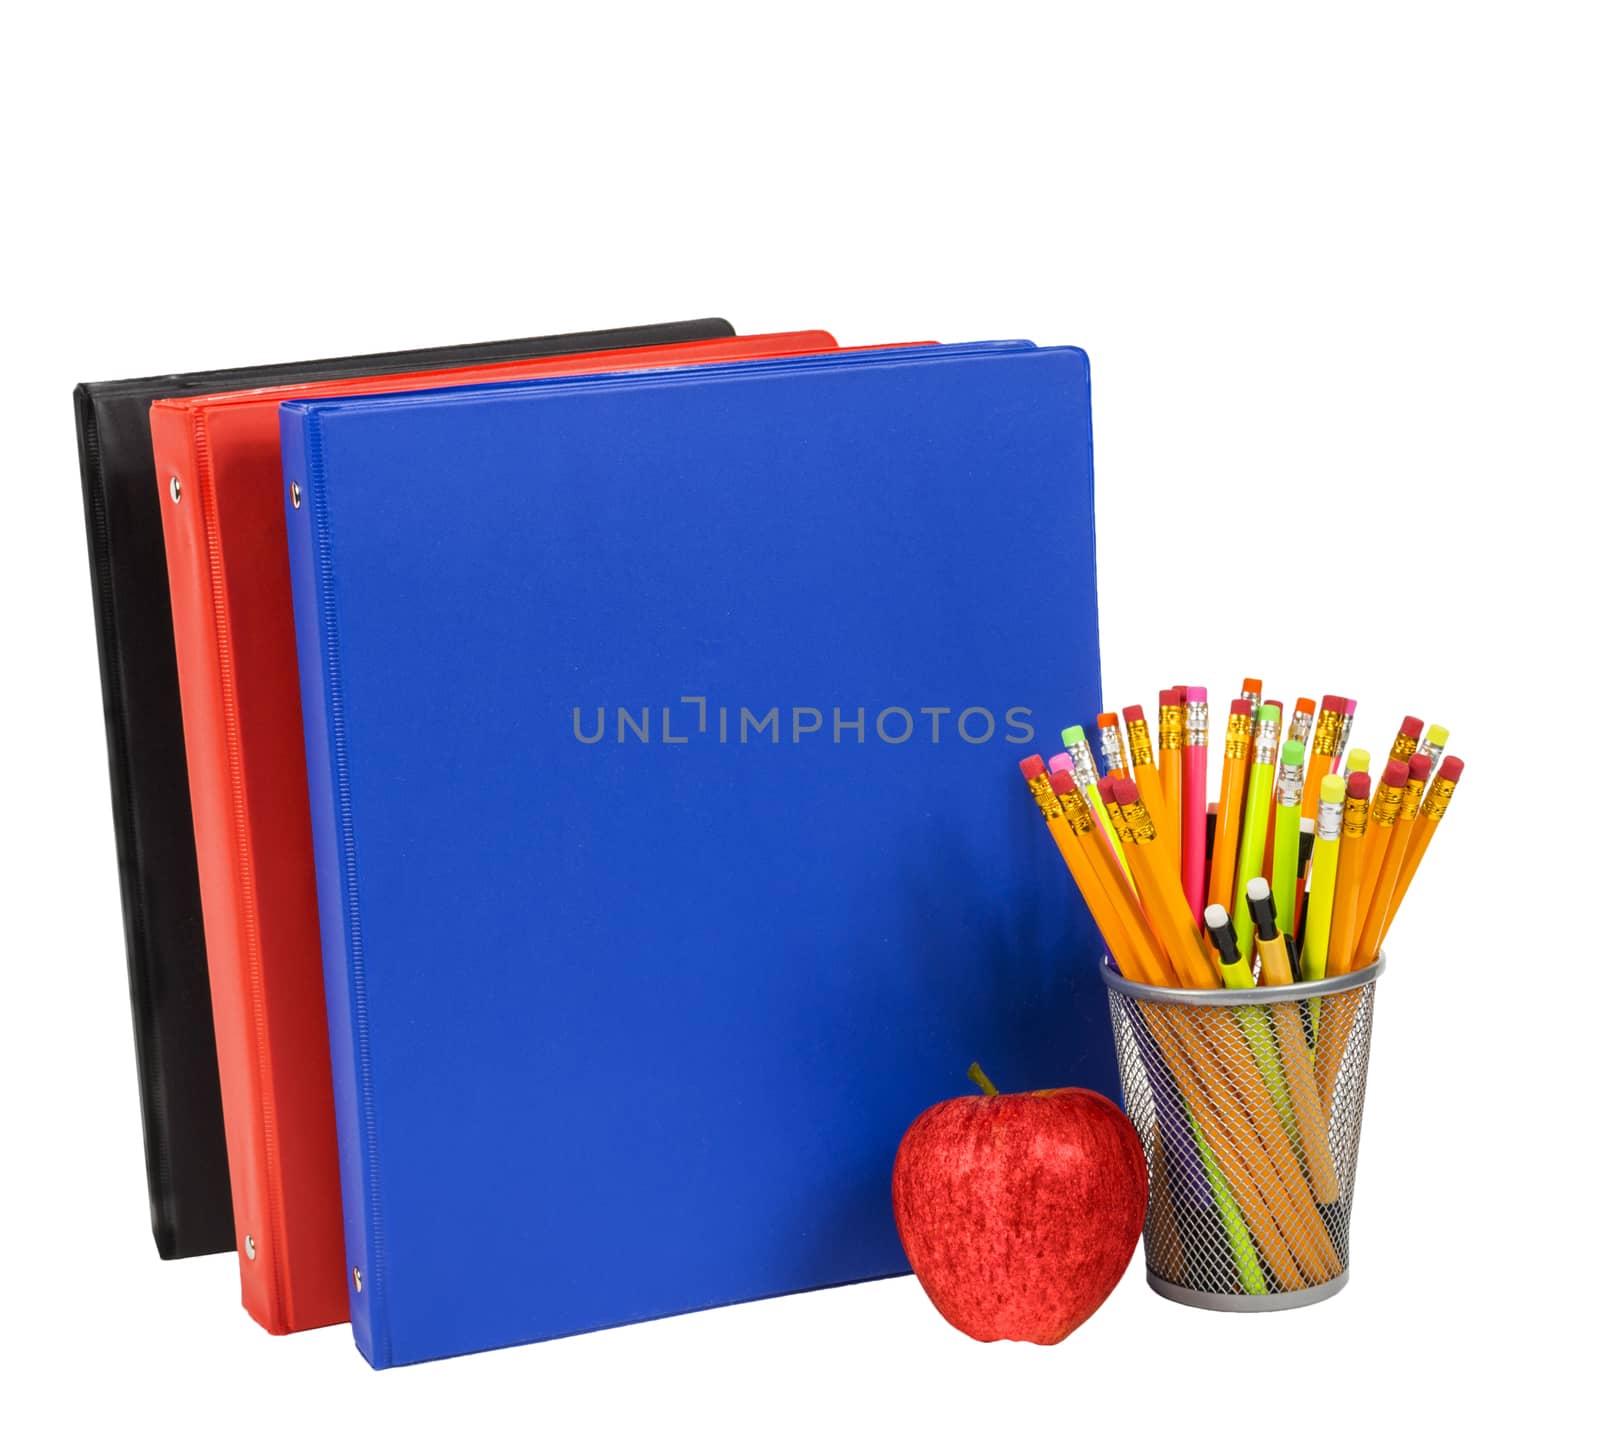 Horizontal shot of colorful notebooks, pencils and a red apple isolated on white background.